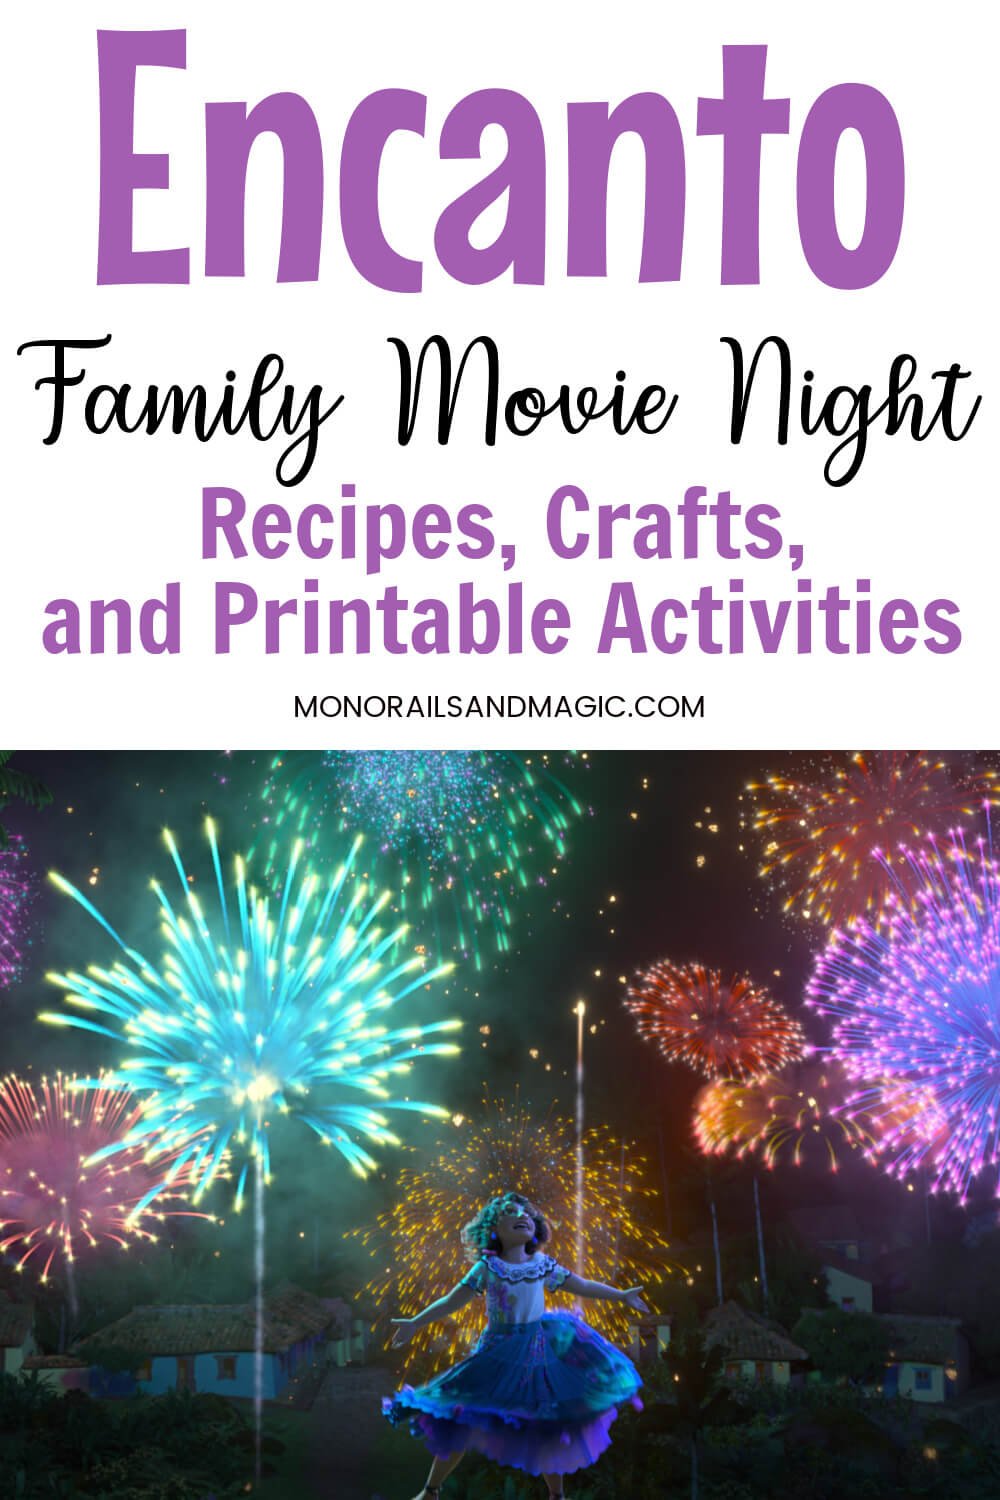 Recipes, crafts, and printable activities for an Encanto family movie night.